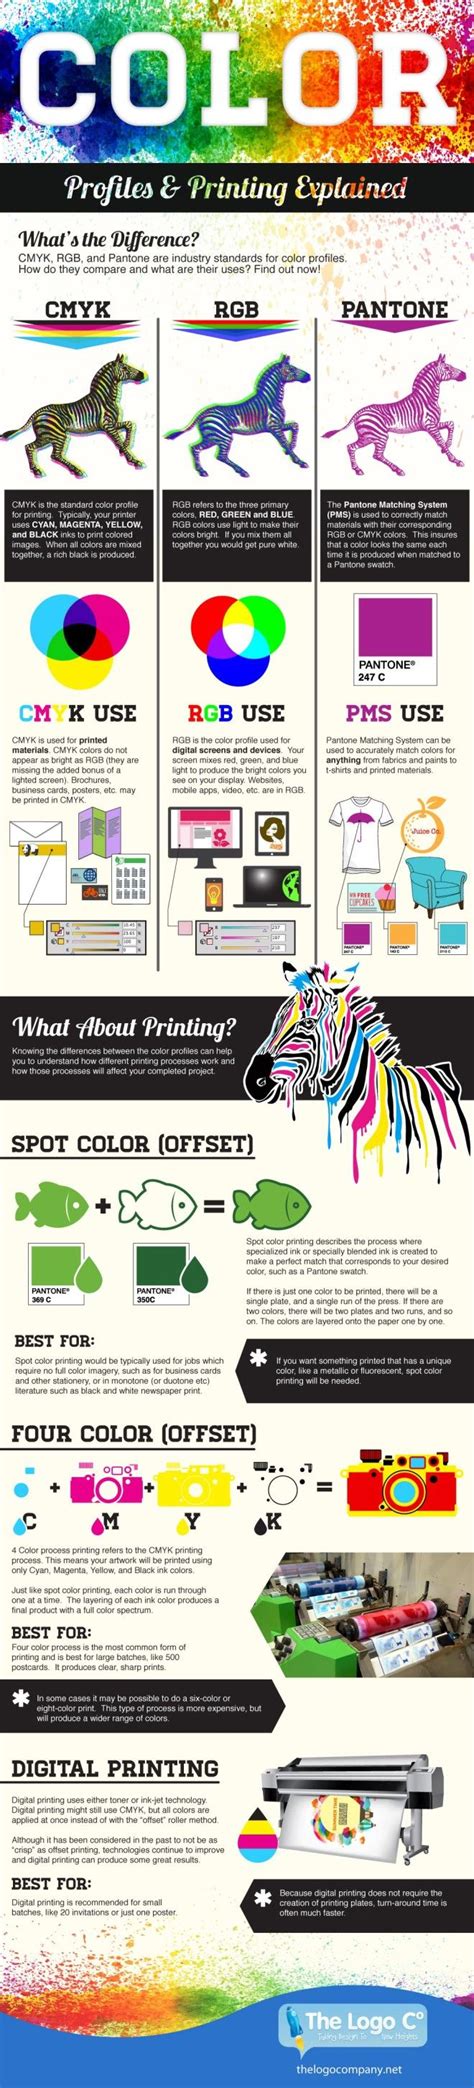 Rgb Cmyk And Pms Colors Explained Graphic Design Tips Design Theory